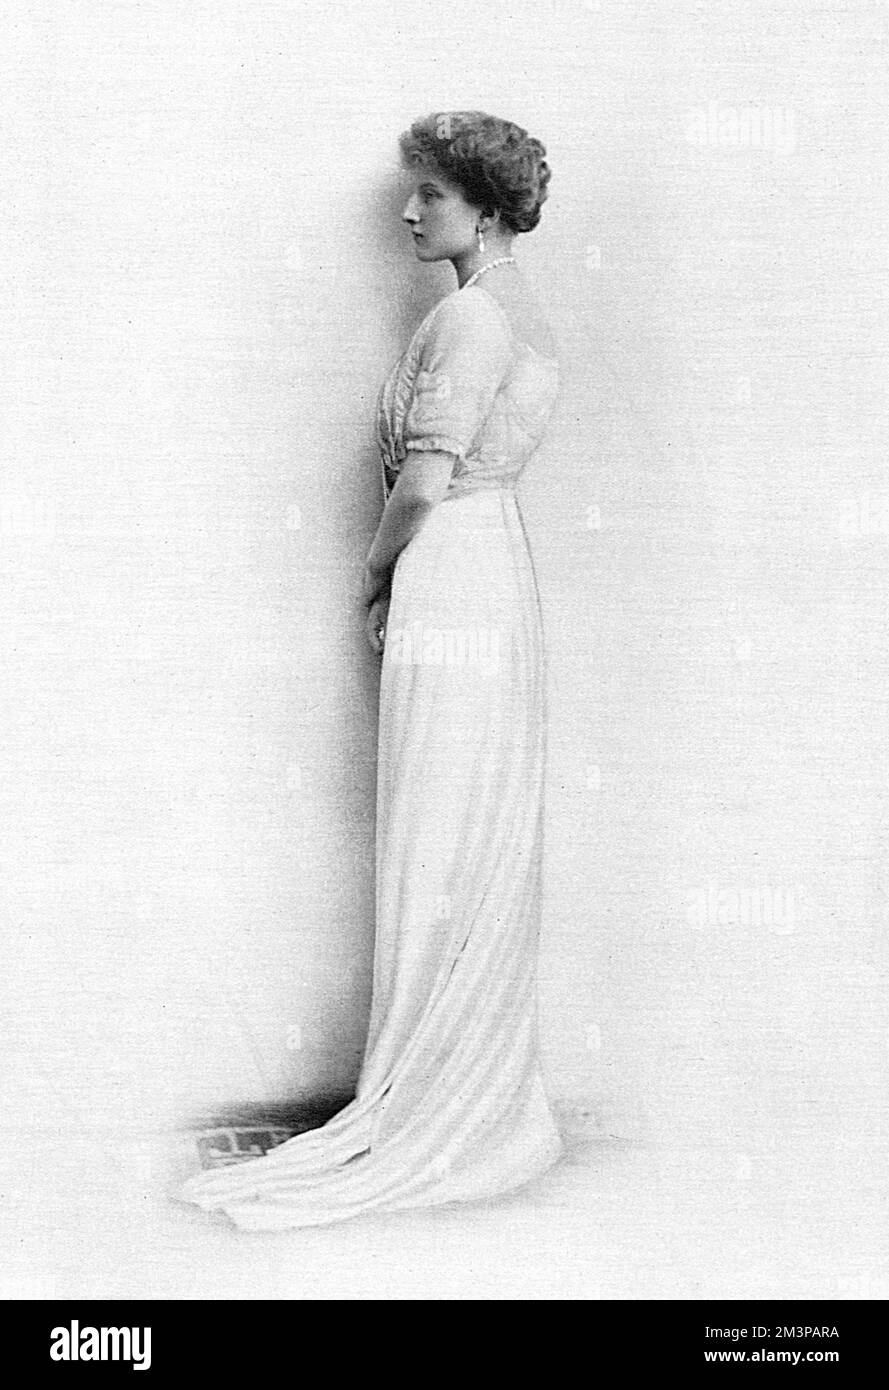 Princess Augusta (or Augustine) Victoria of Hohenzollern (19 August 1890  29 August 1966), only daughter of Prince William of Hohenzollern, was a German princess and wife of King Manuel II of Portugal but only following his deposition. The couple married on 4 September 1913.  The Tatler asks if, as the wife of a deposed monarch, if she will be given HRH or Majesty.       Date: 1913 Stock Photo